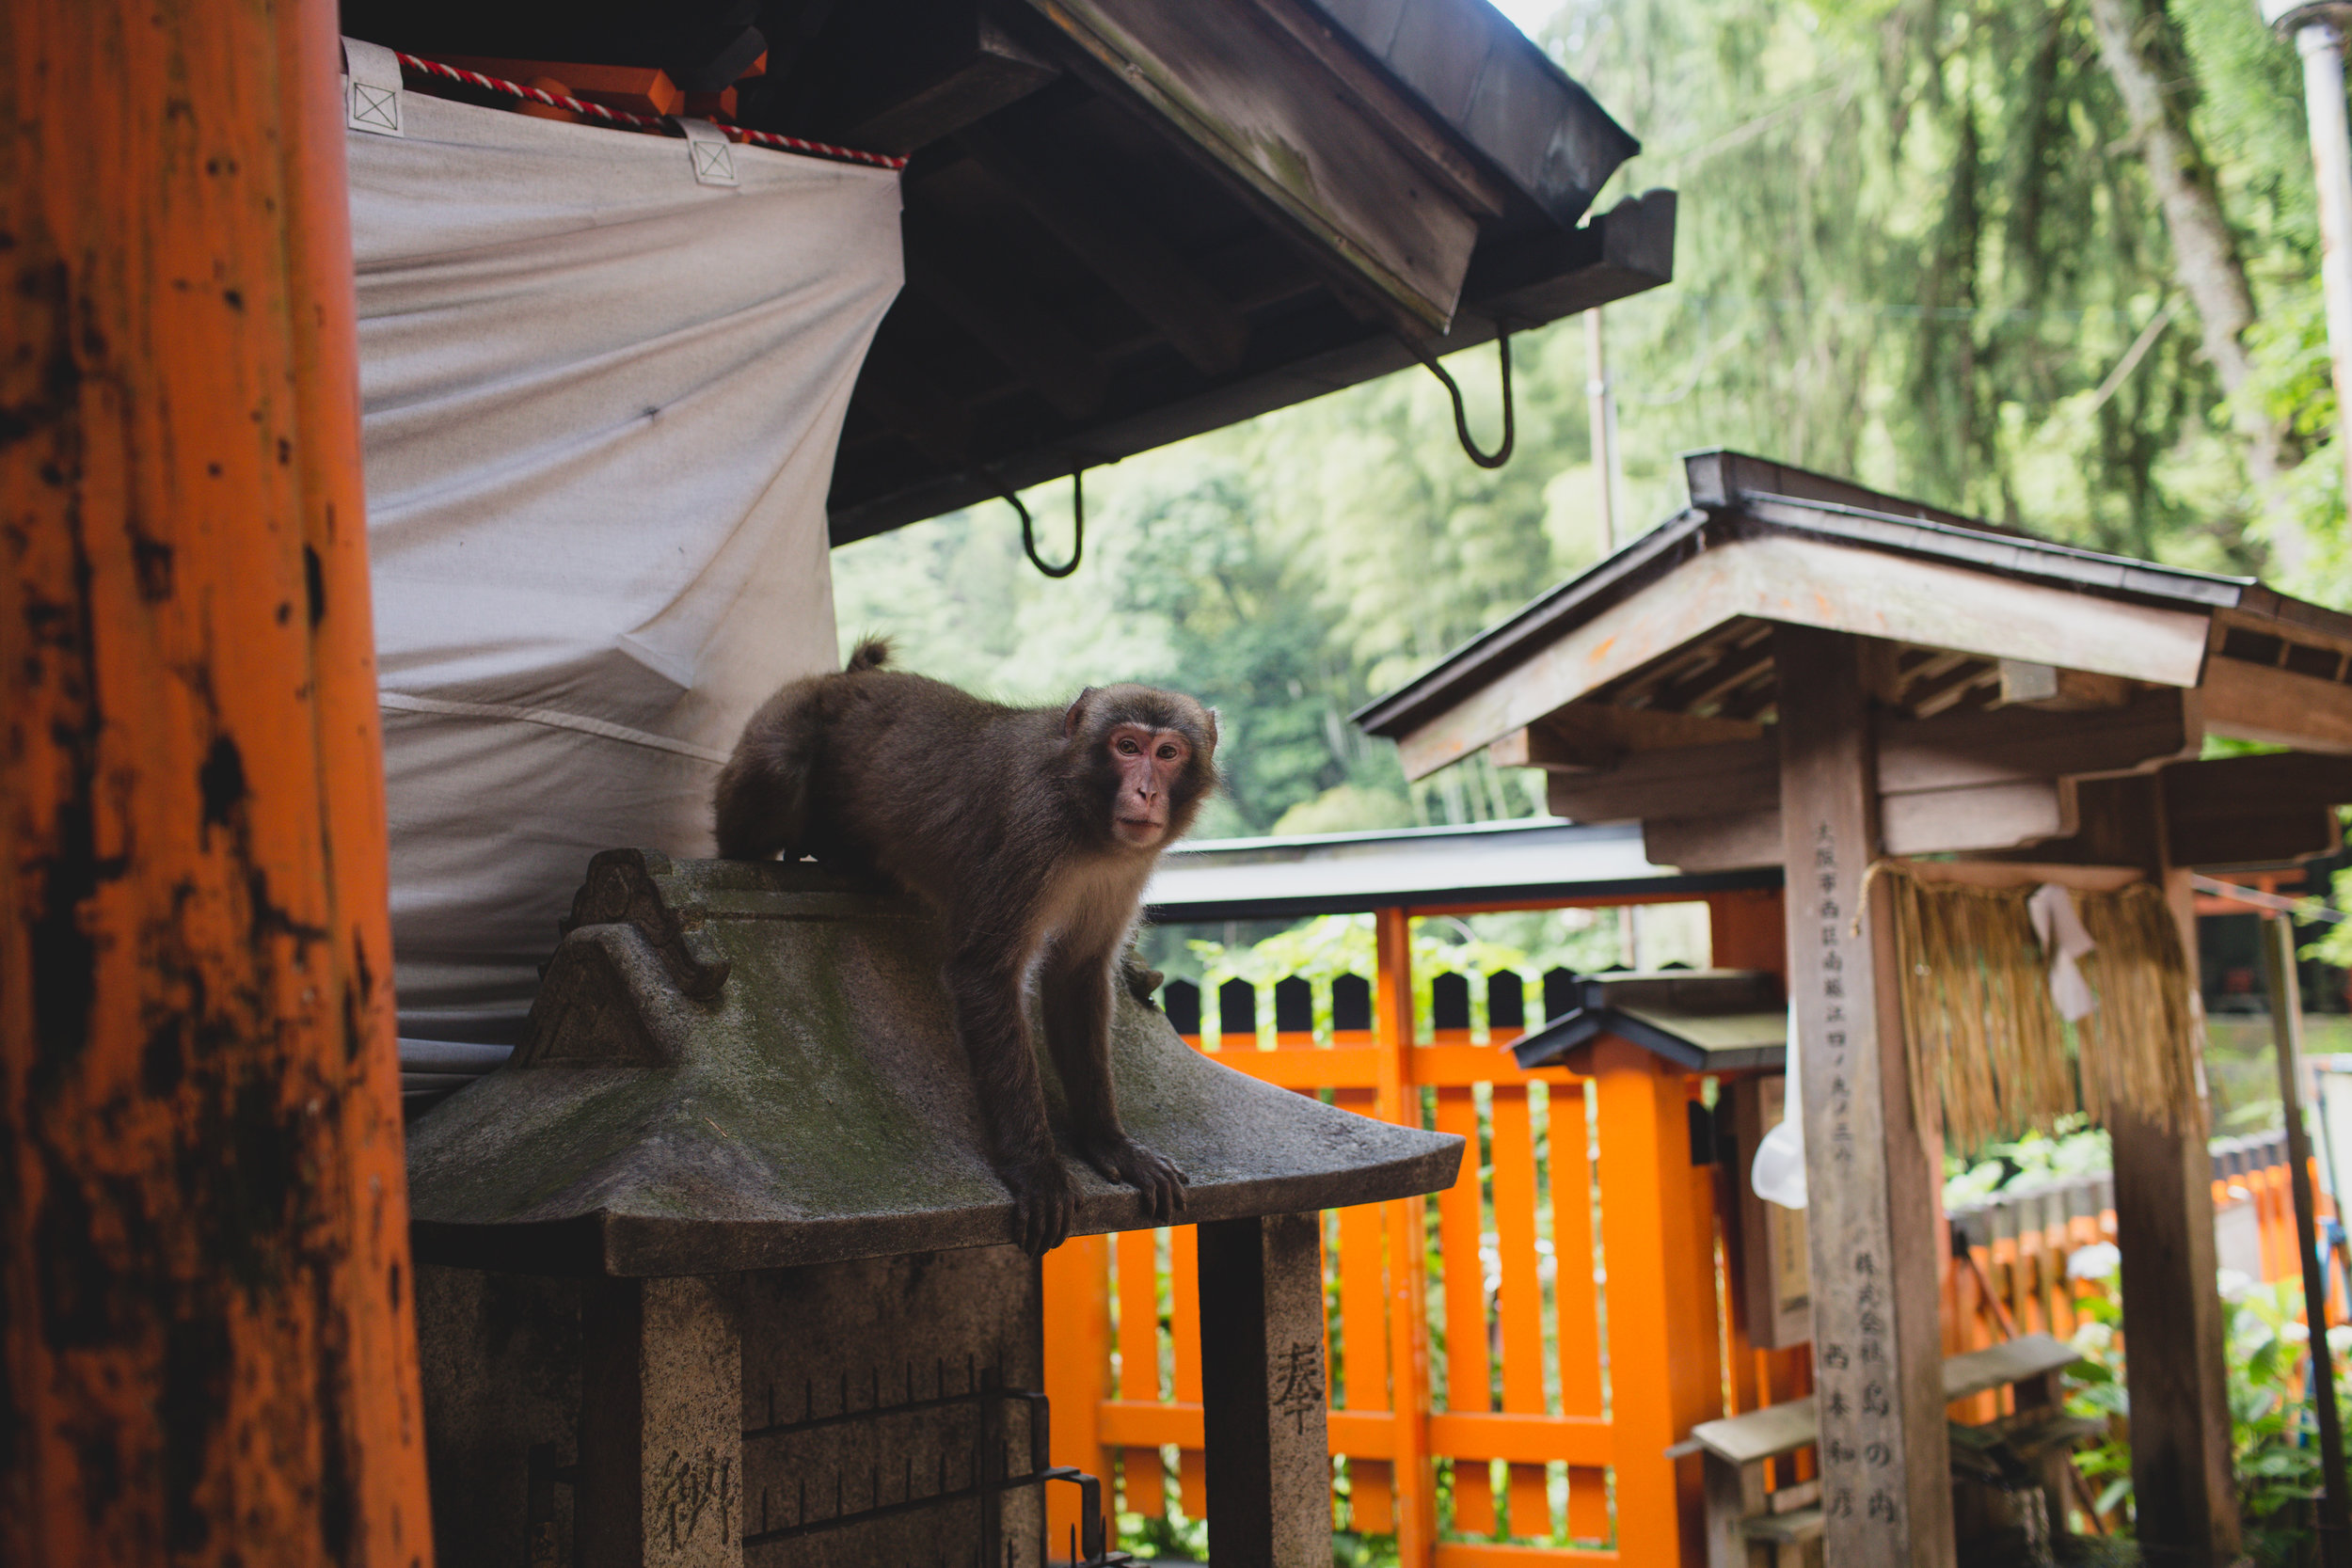  A surprise encounter with a monkey!   